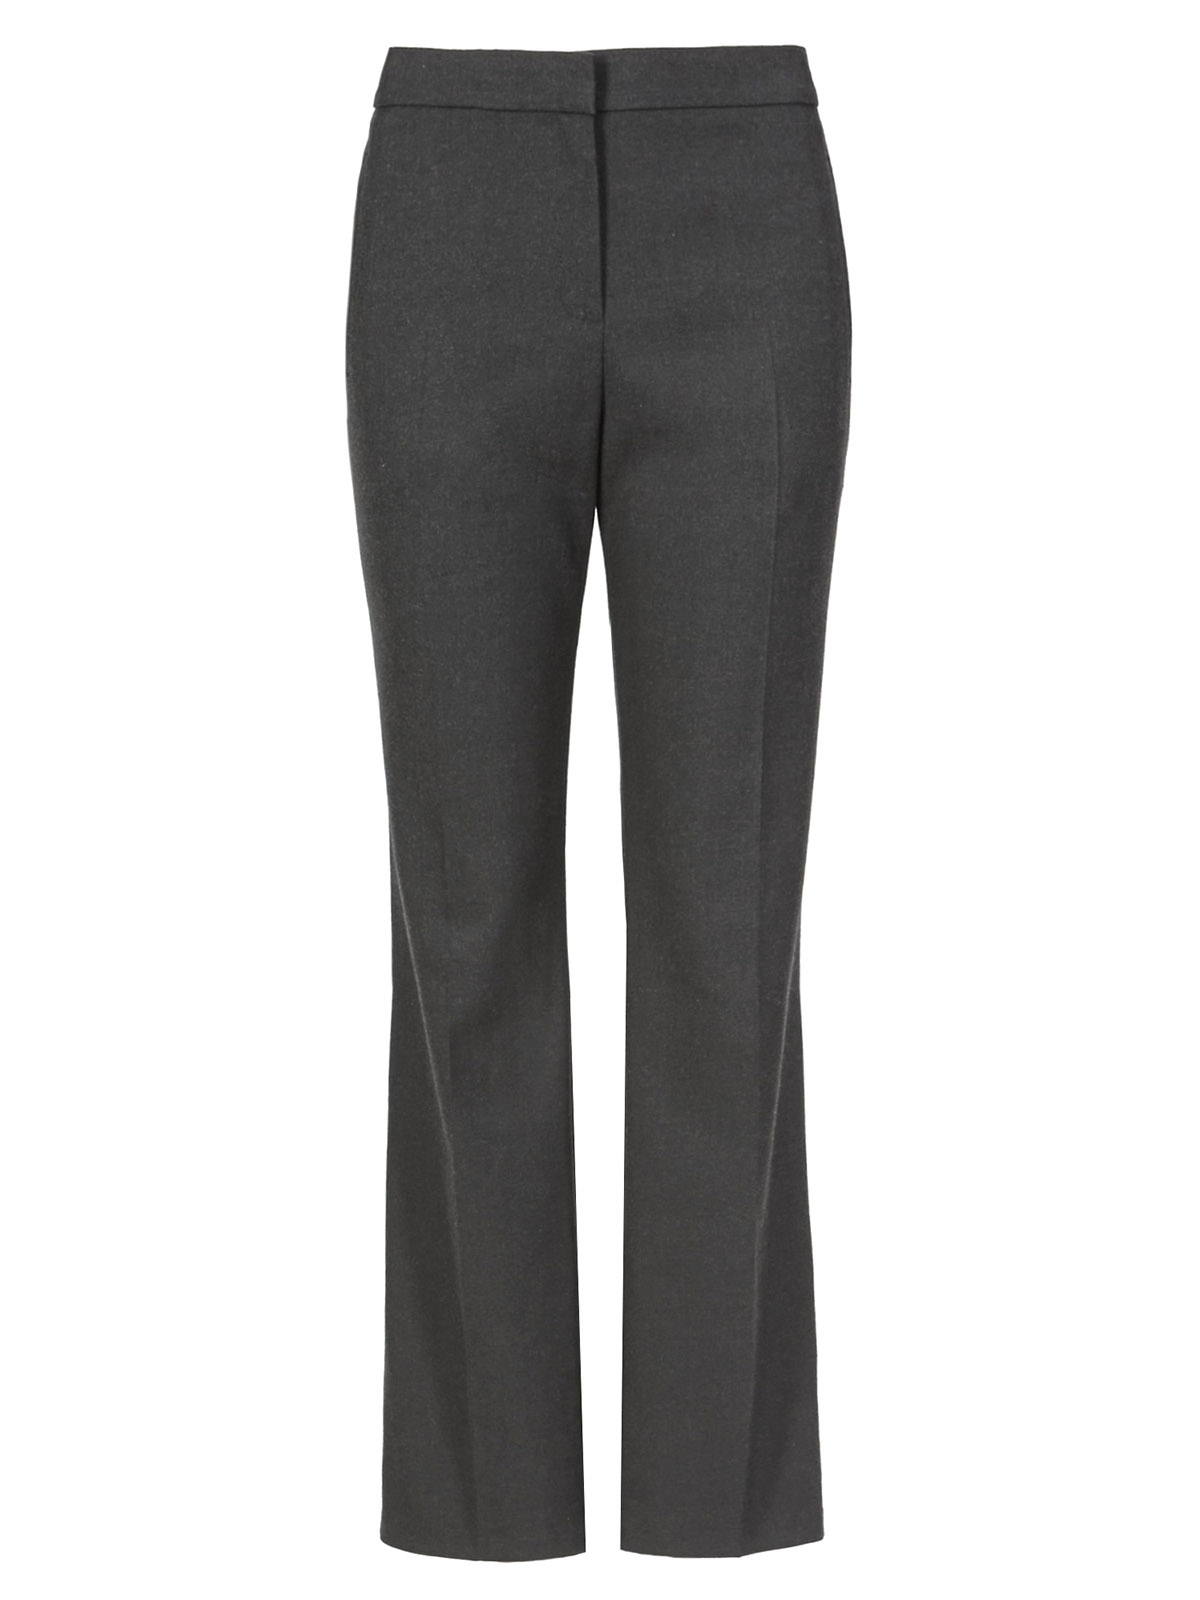 Marks and Spencer - - M&5 CHARCOAL Bootleg Trousers - Plus Size 14 to 22